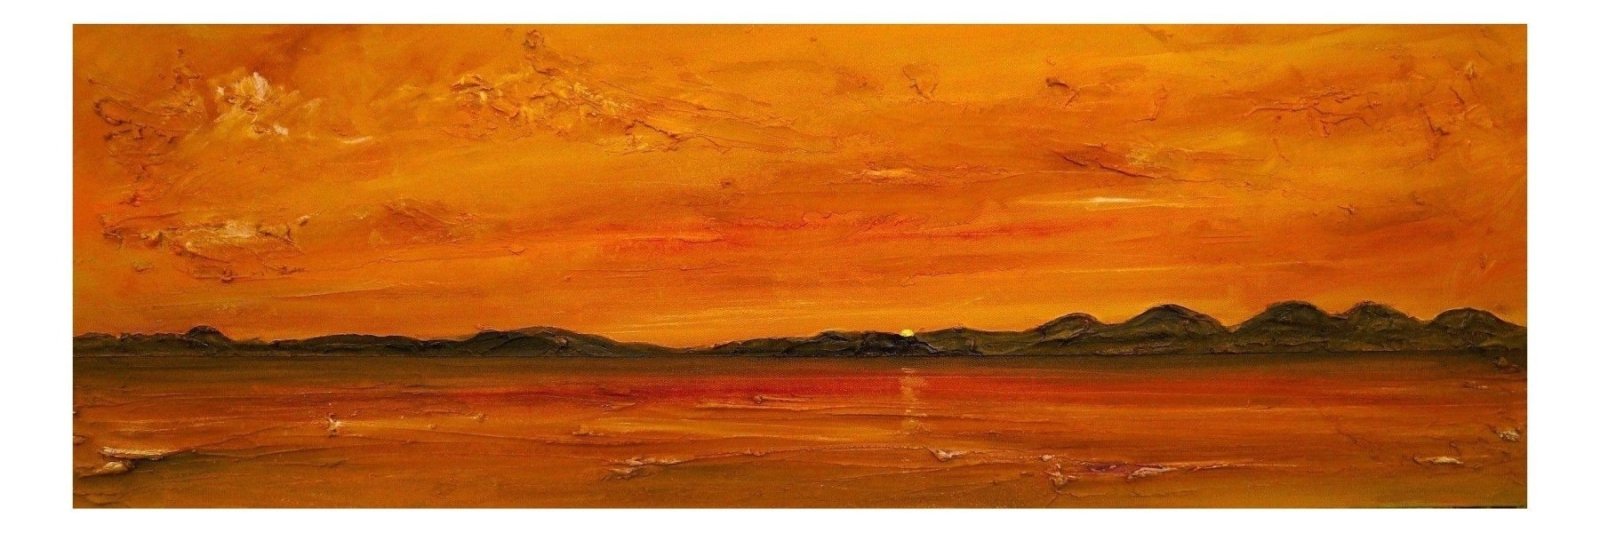 Sunset Over Jura-Panoramic Prints-Hebridean Islands Art Gallery-Paintings, Prints, Homeware, Art Gifts From Scotland By Scottish Artist Kevin Hunter